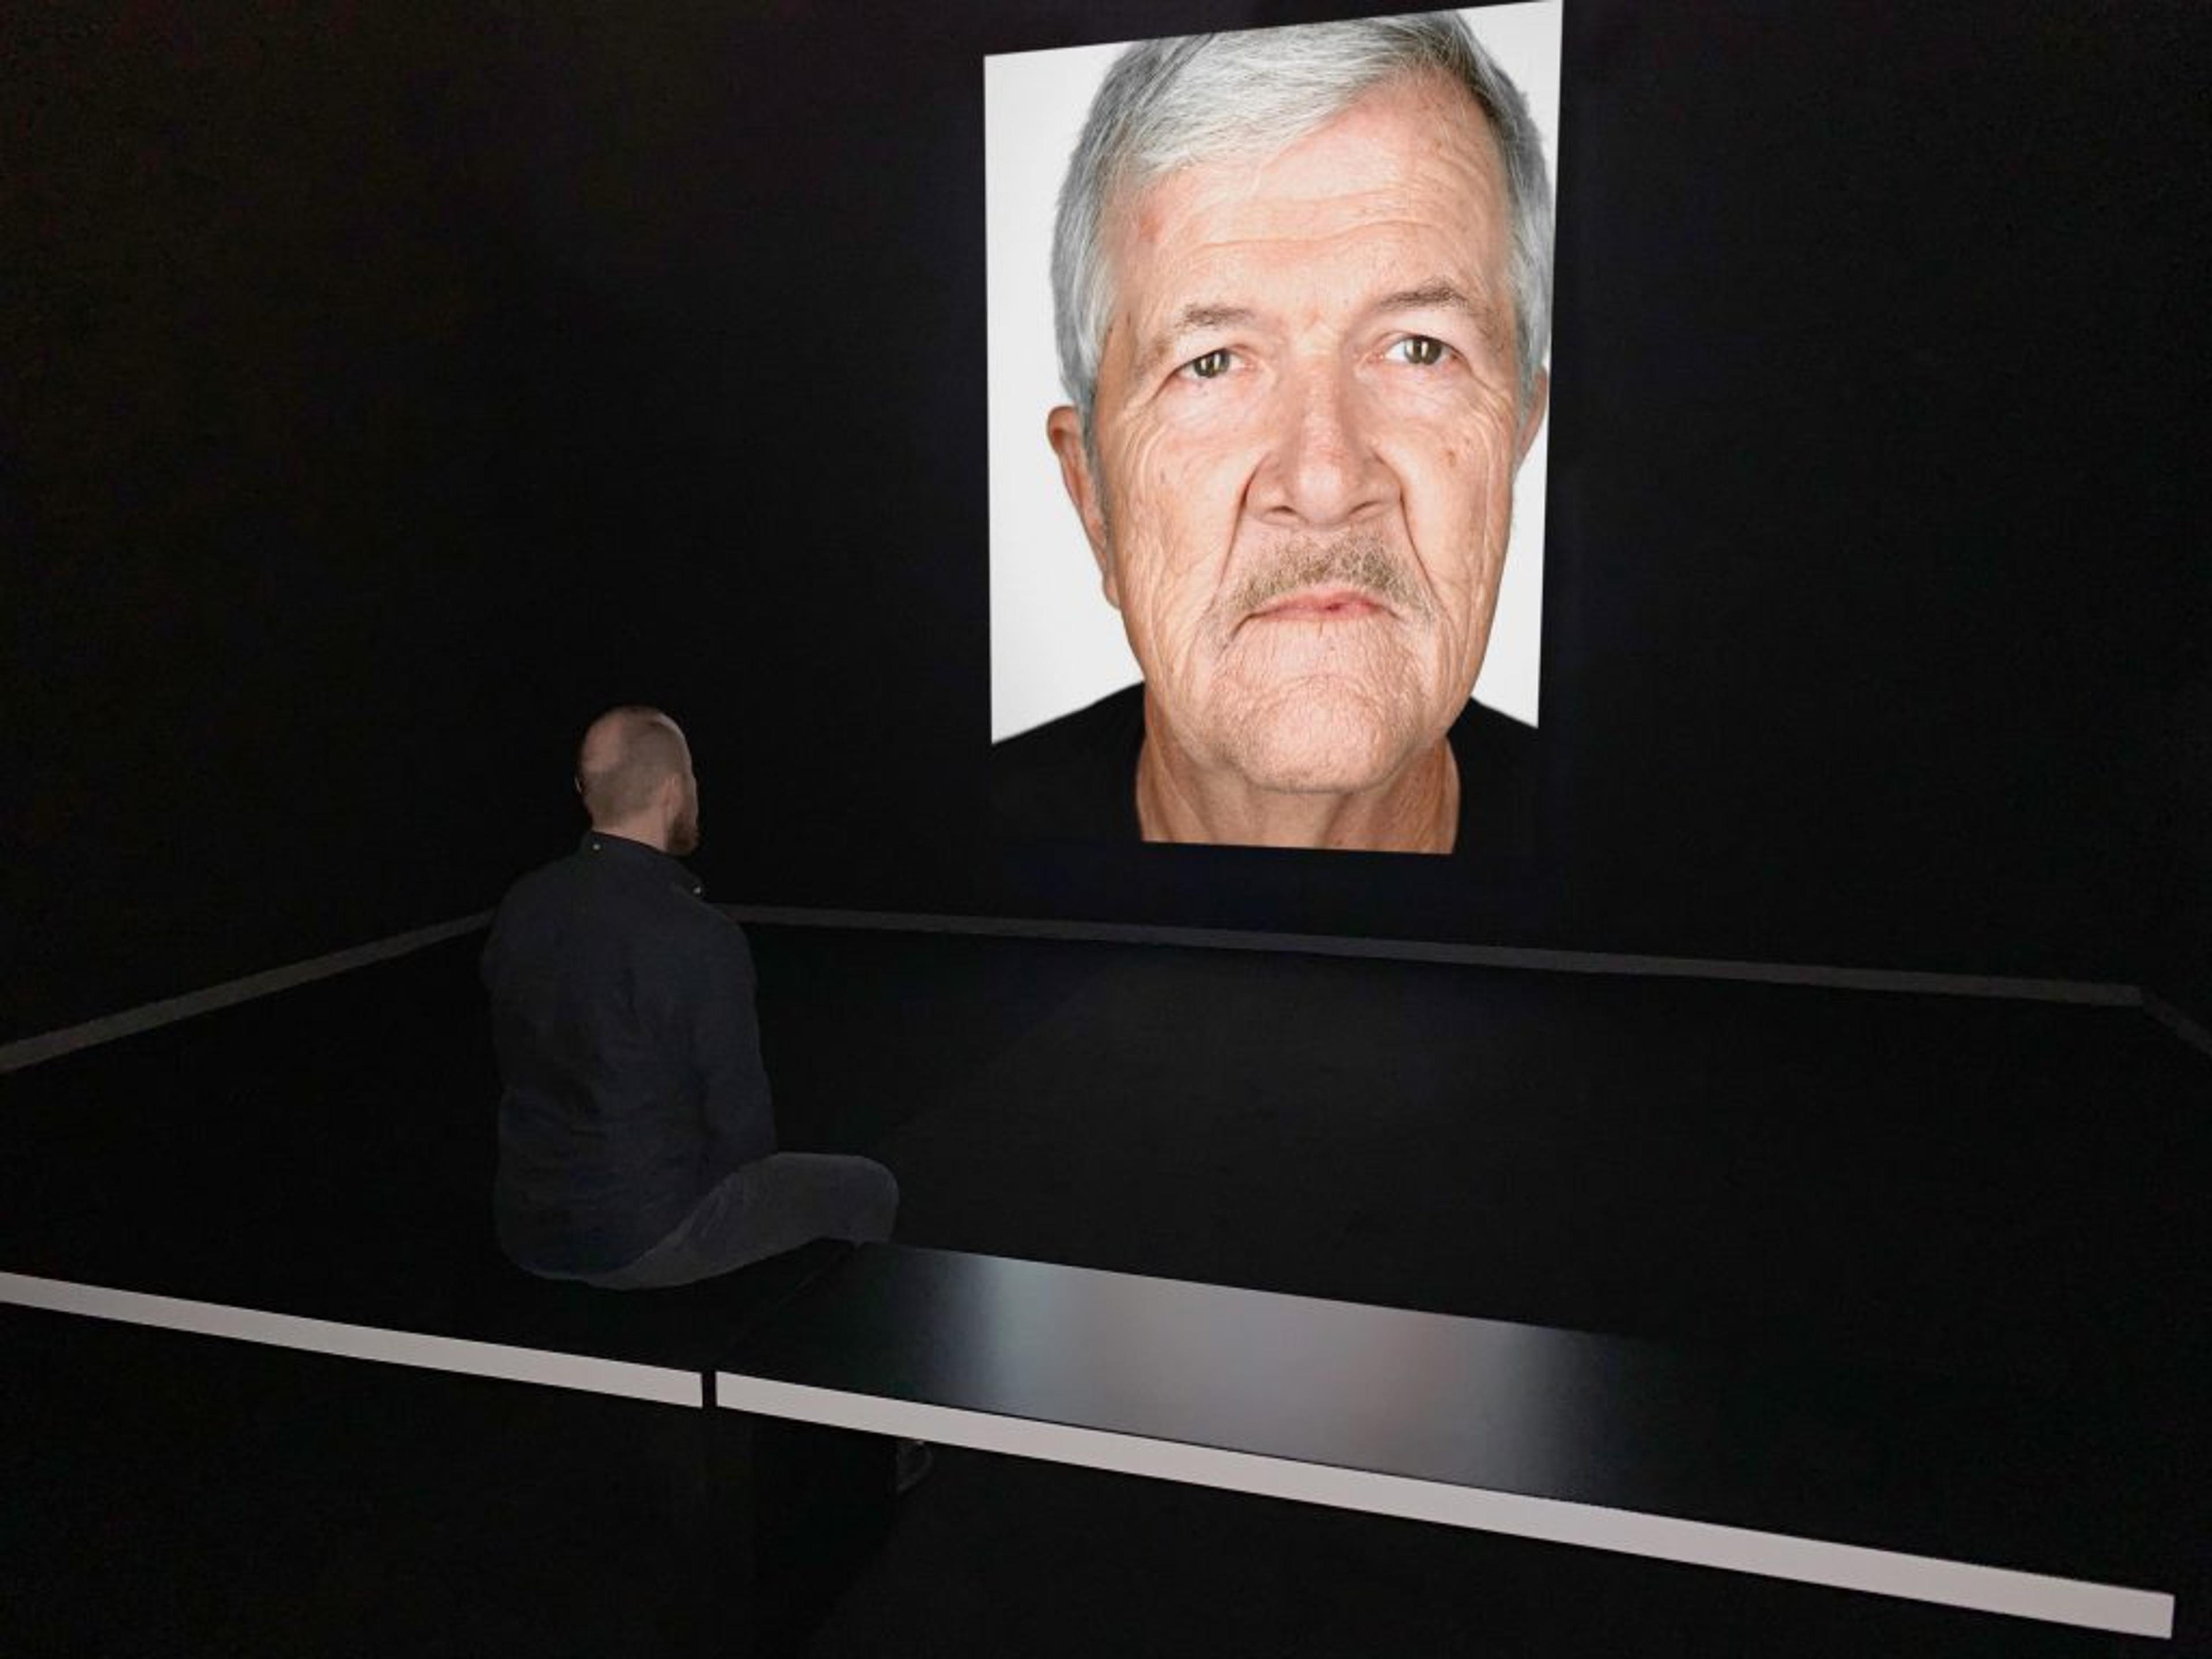 An observer looking at at an image projected in a dark room of a portrait of a man with white hair